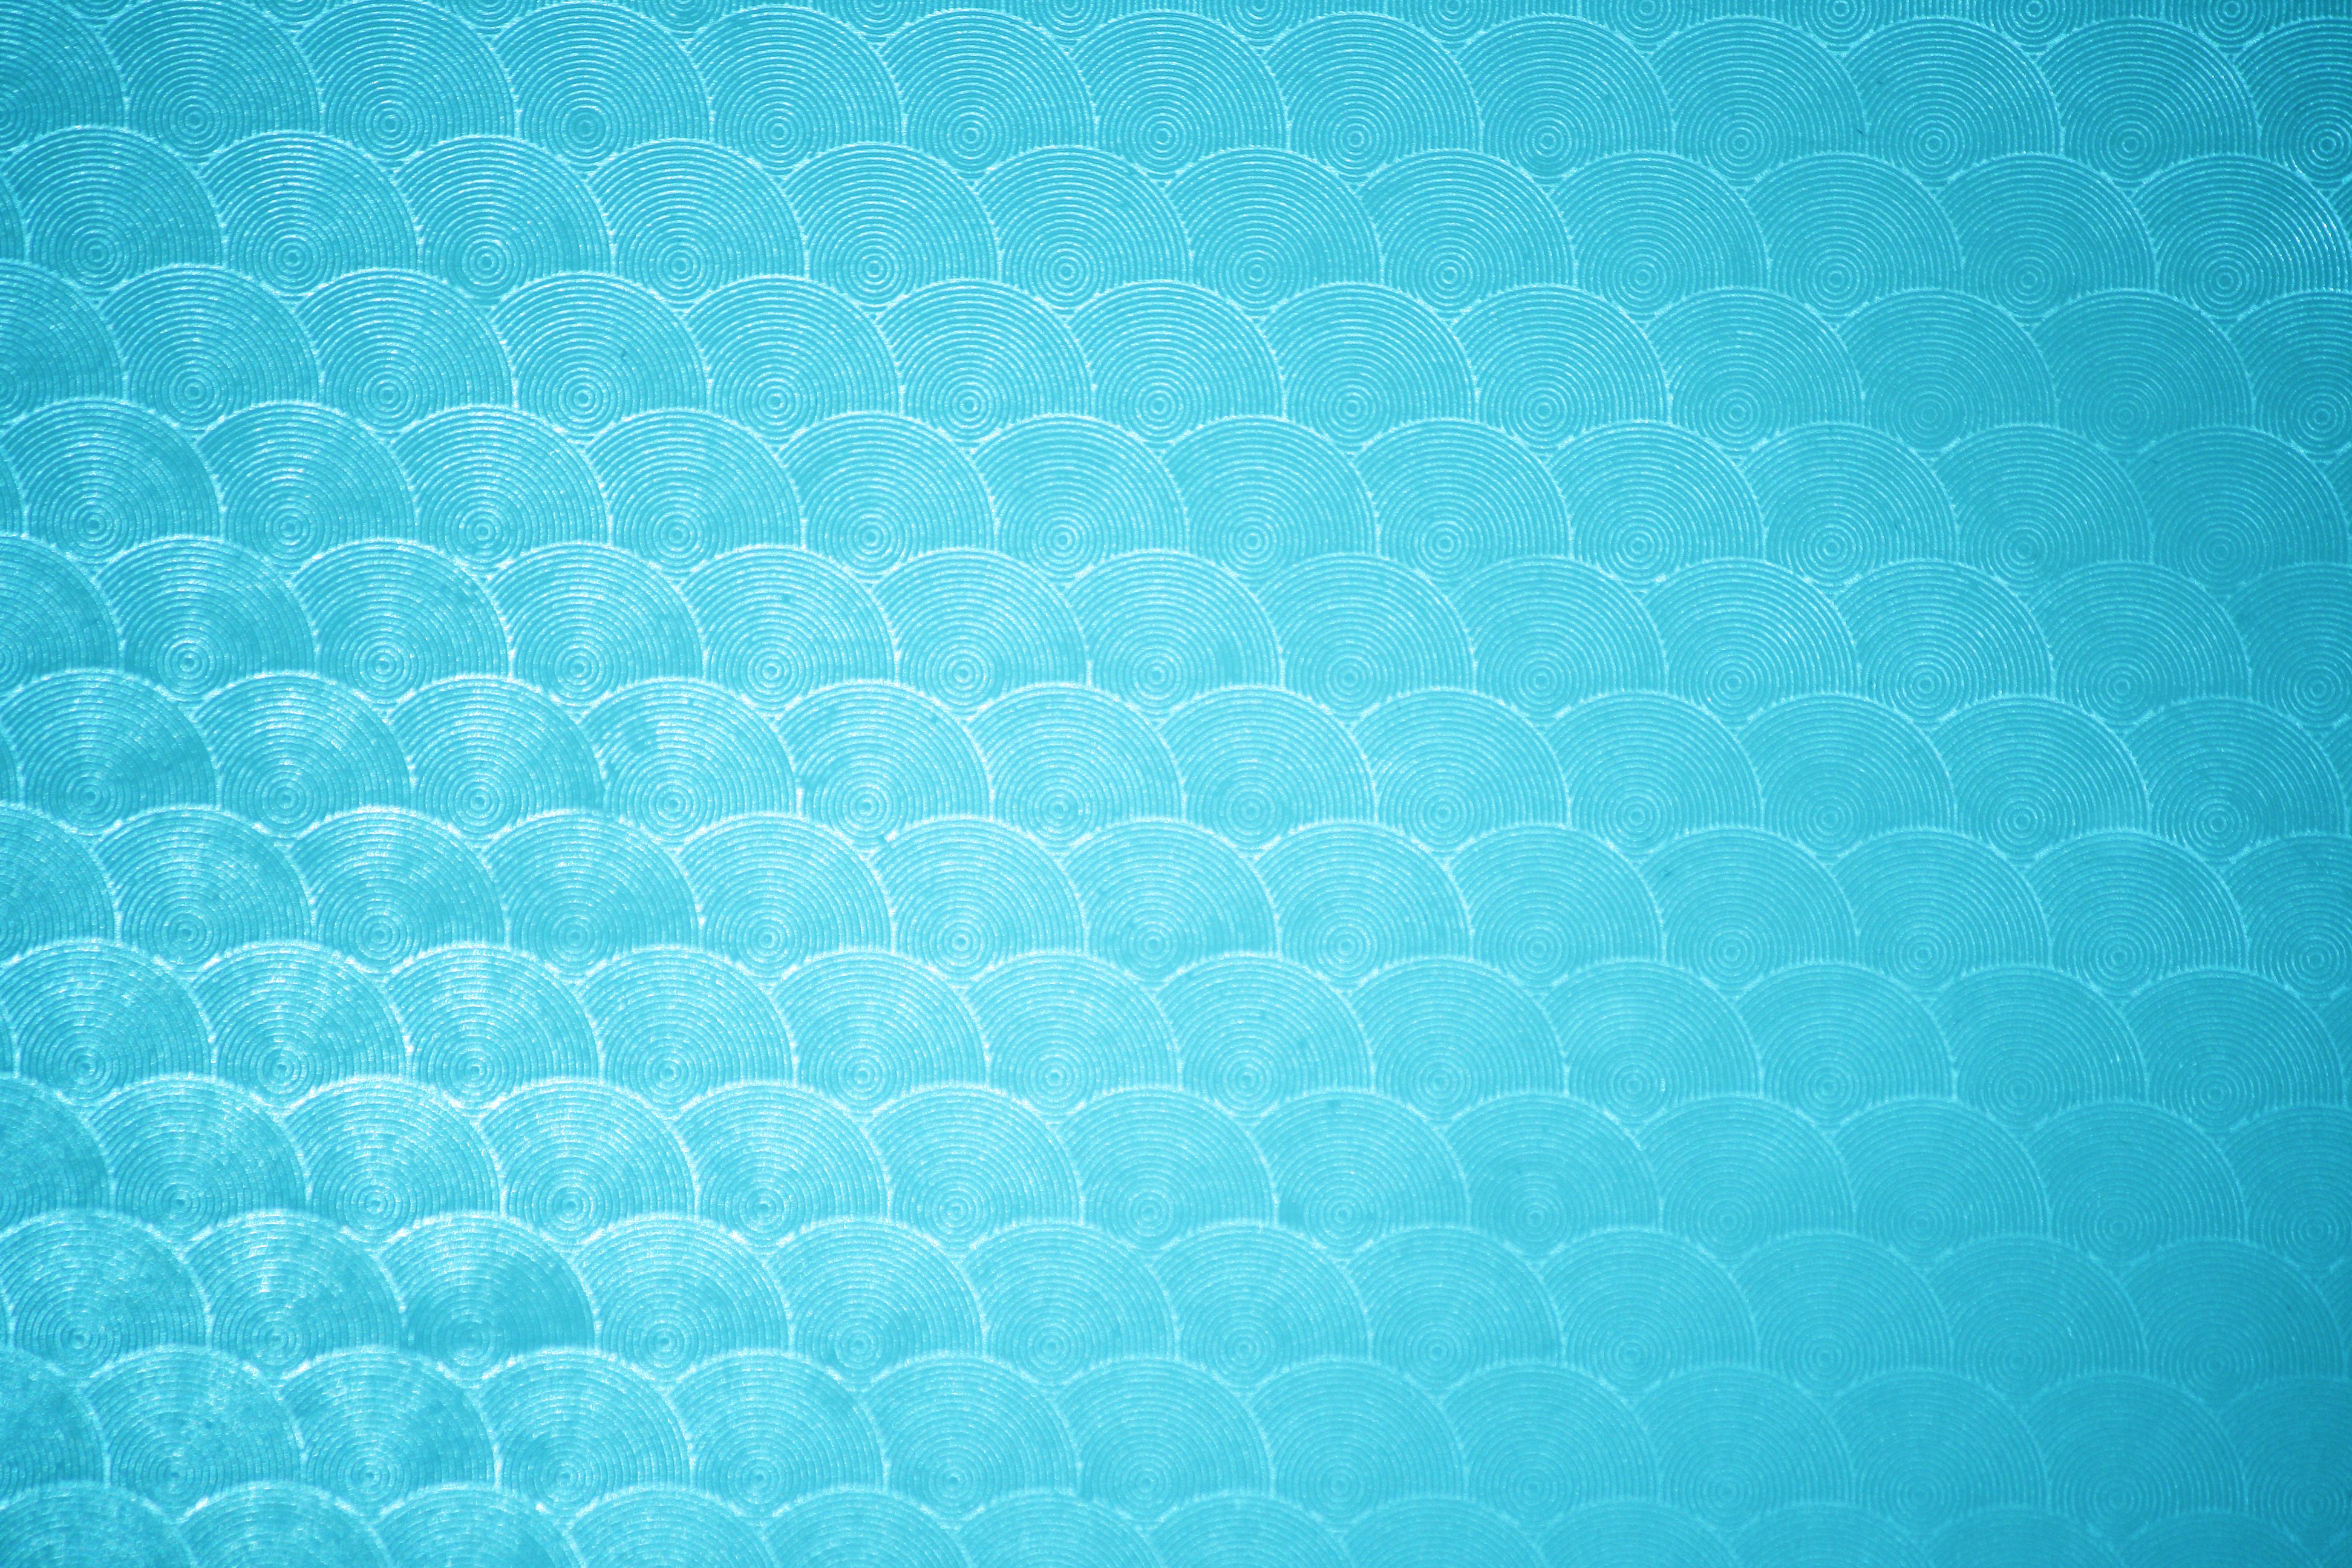 Turquoise Wallpaper Grasscloth